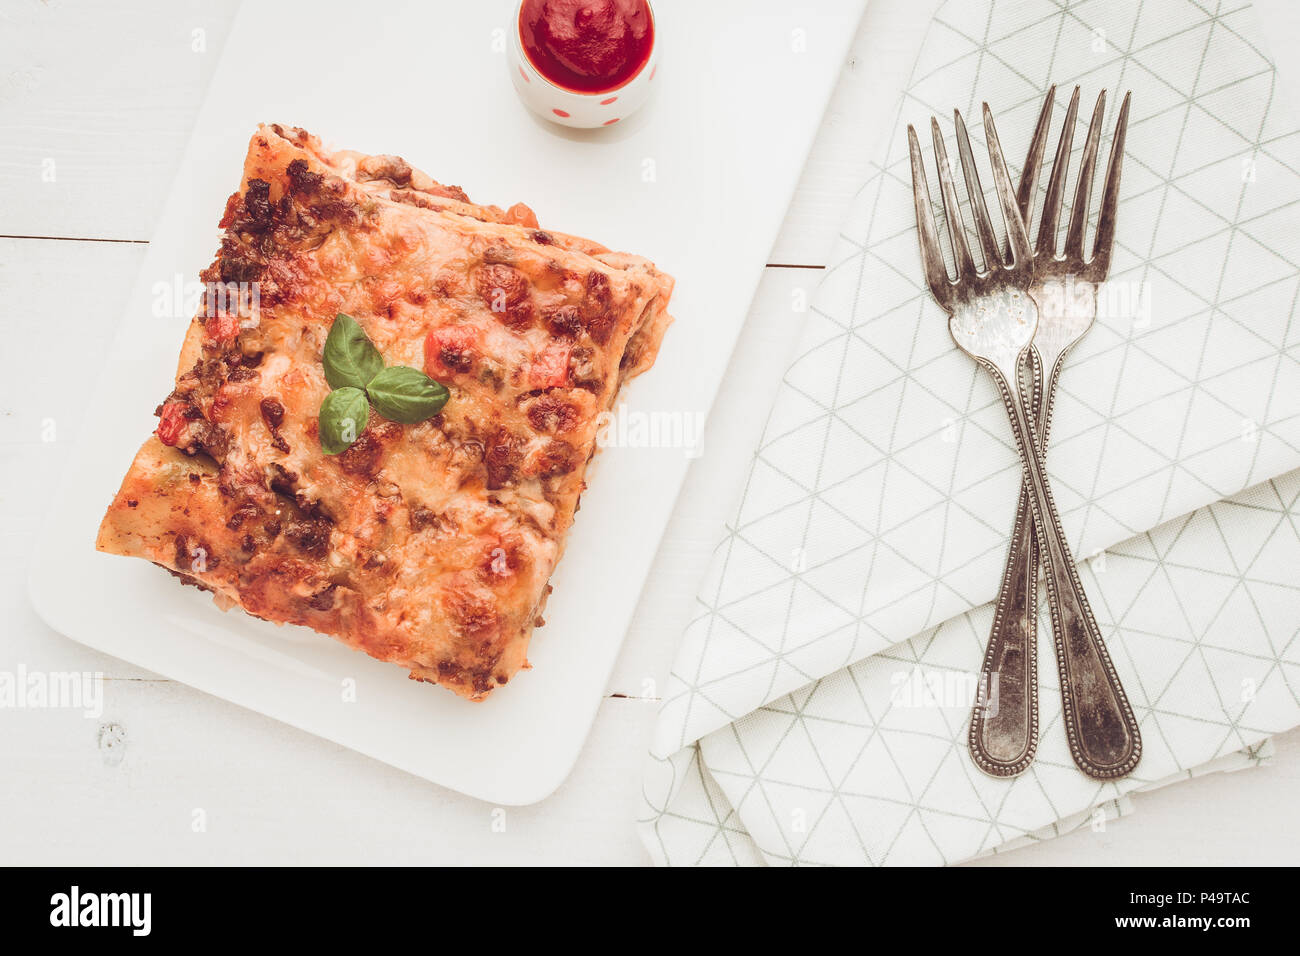 Homemade Lasagna with Minced Beef, Tomato Sauce and Fresh Basil on White Plate Stock Photo